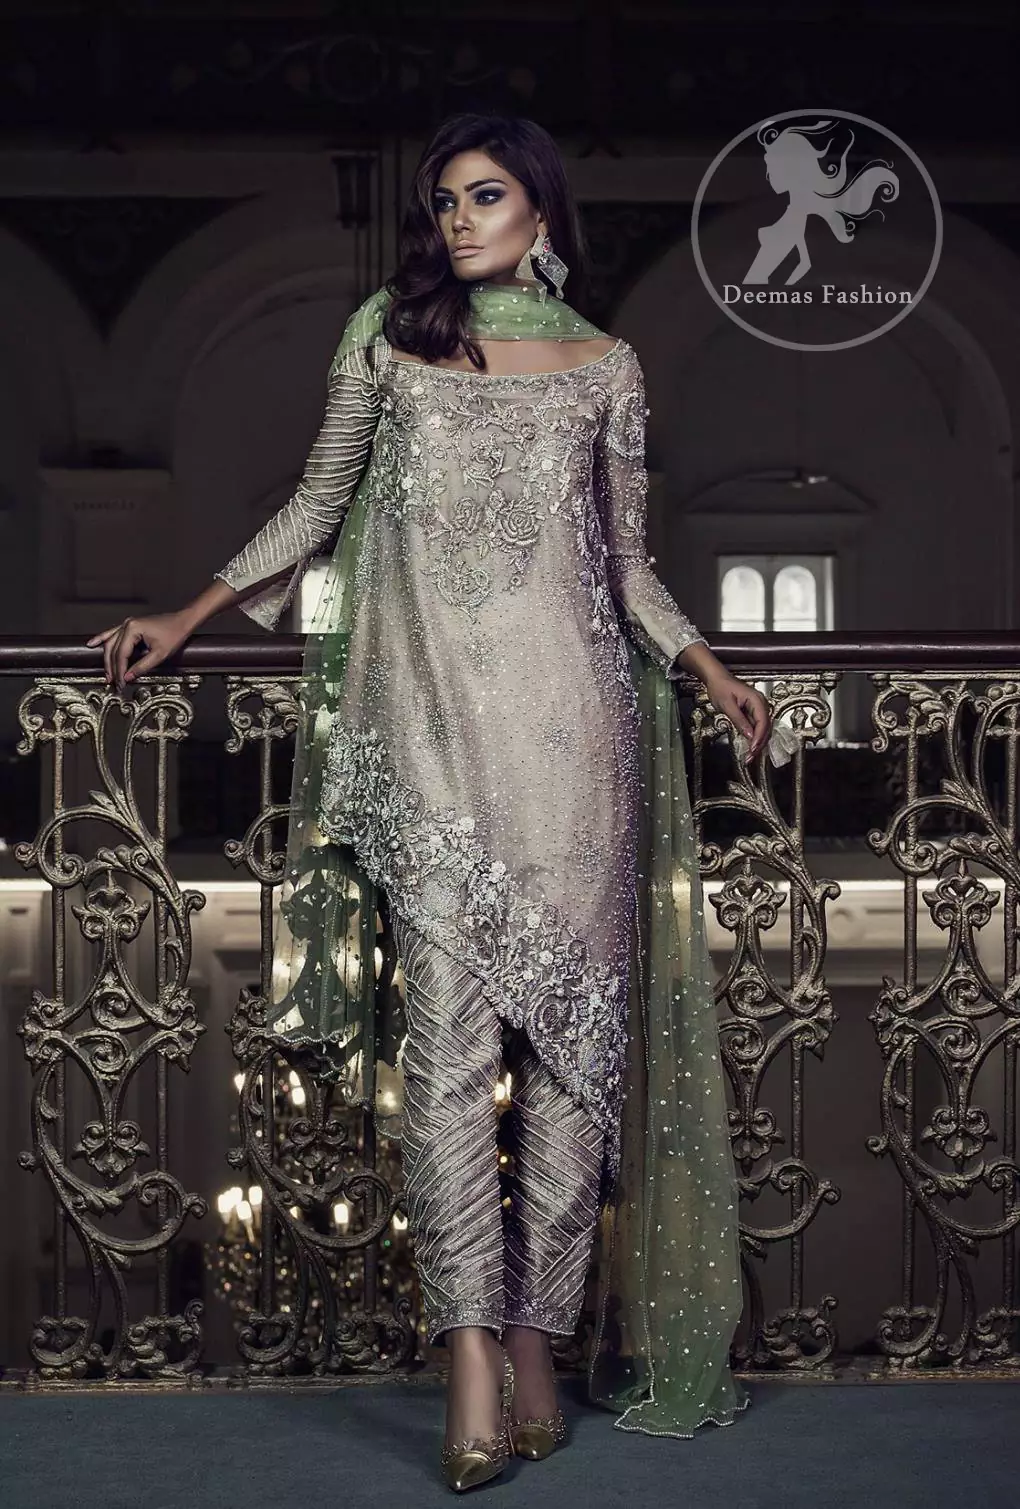 Features marvellous and awesome embellishments accent on the front. Full-length sheer Embellished sleeves and Concealed with back zip closure. Dupatta contains pearls and sequins sprayed all over.
